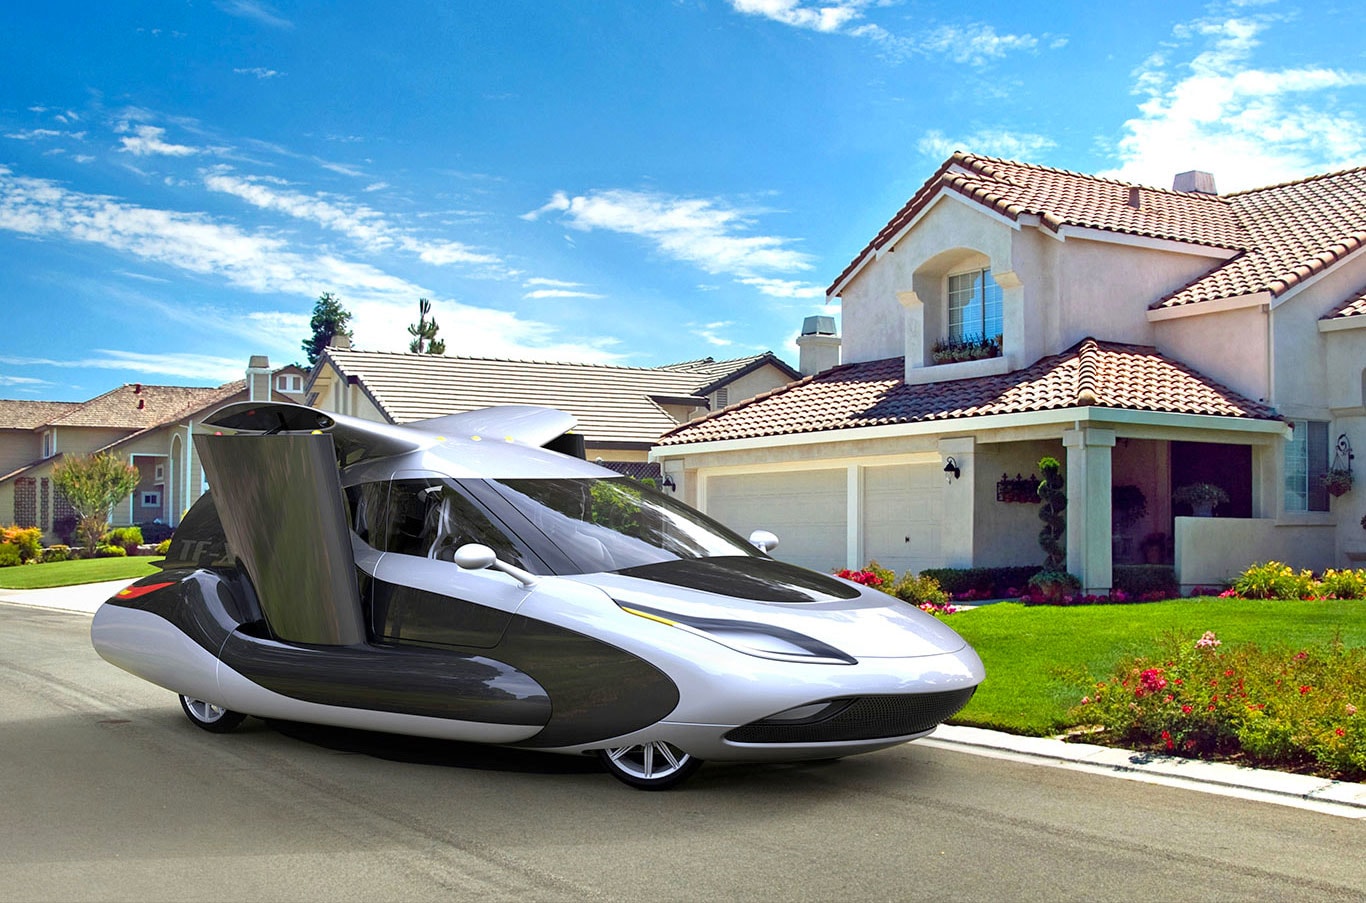 Volvo Geely Terrafugia Flying Car Start Up Acquisition purchase bought airplane vehicle plane wings